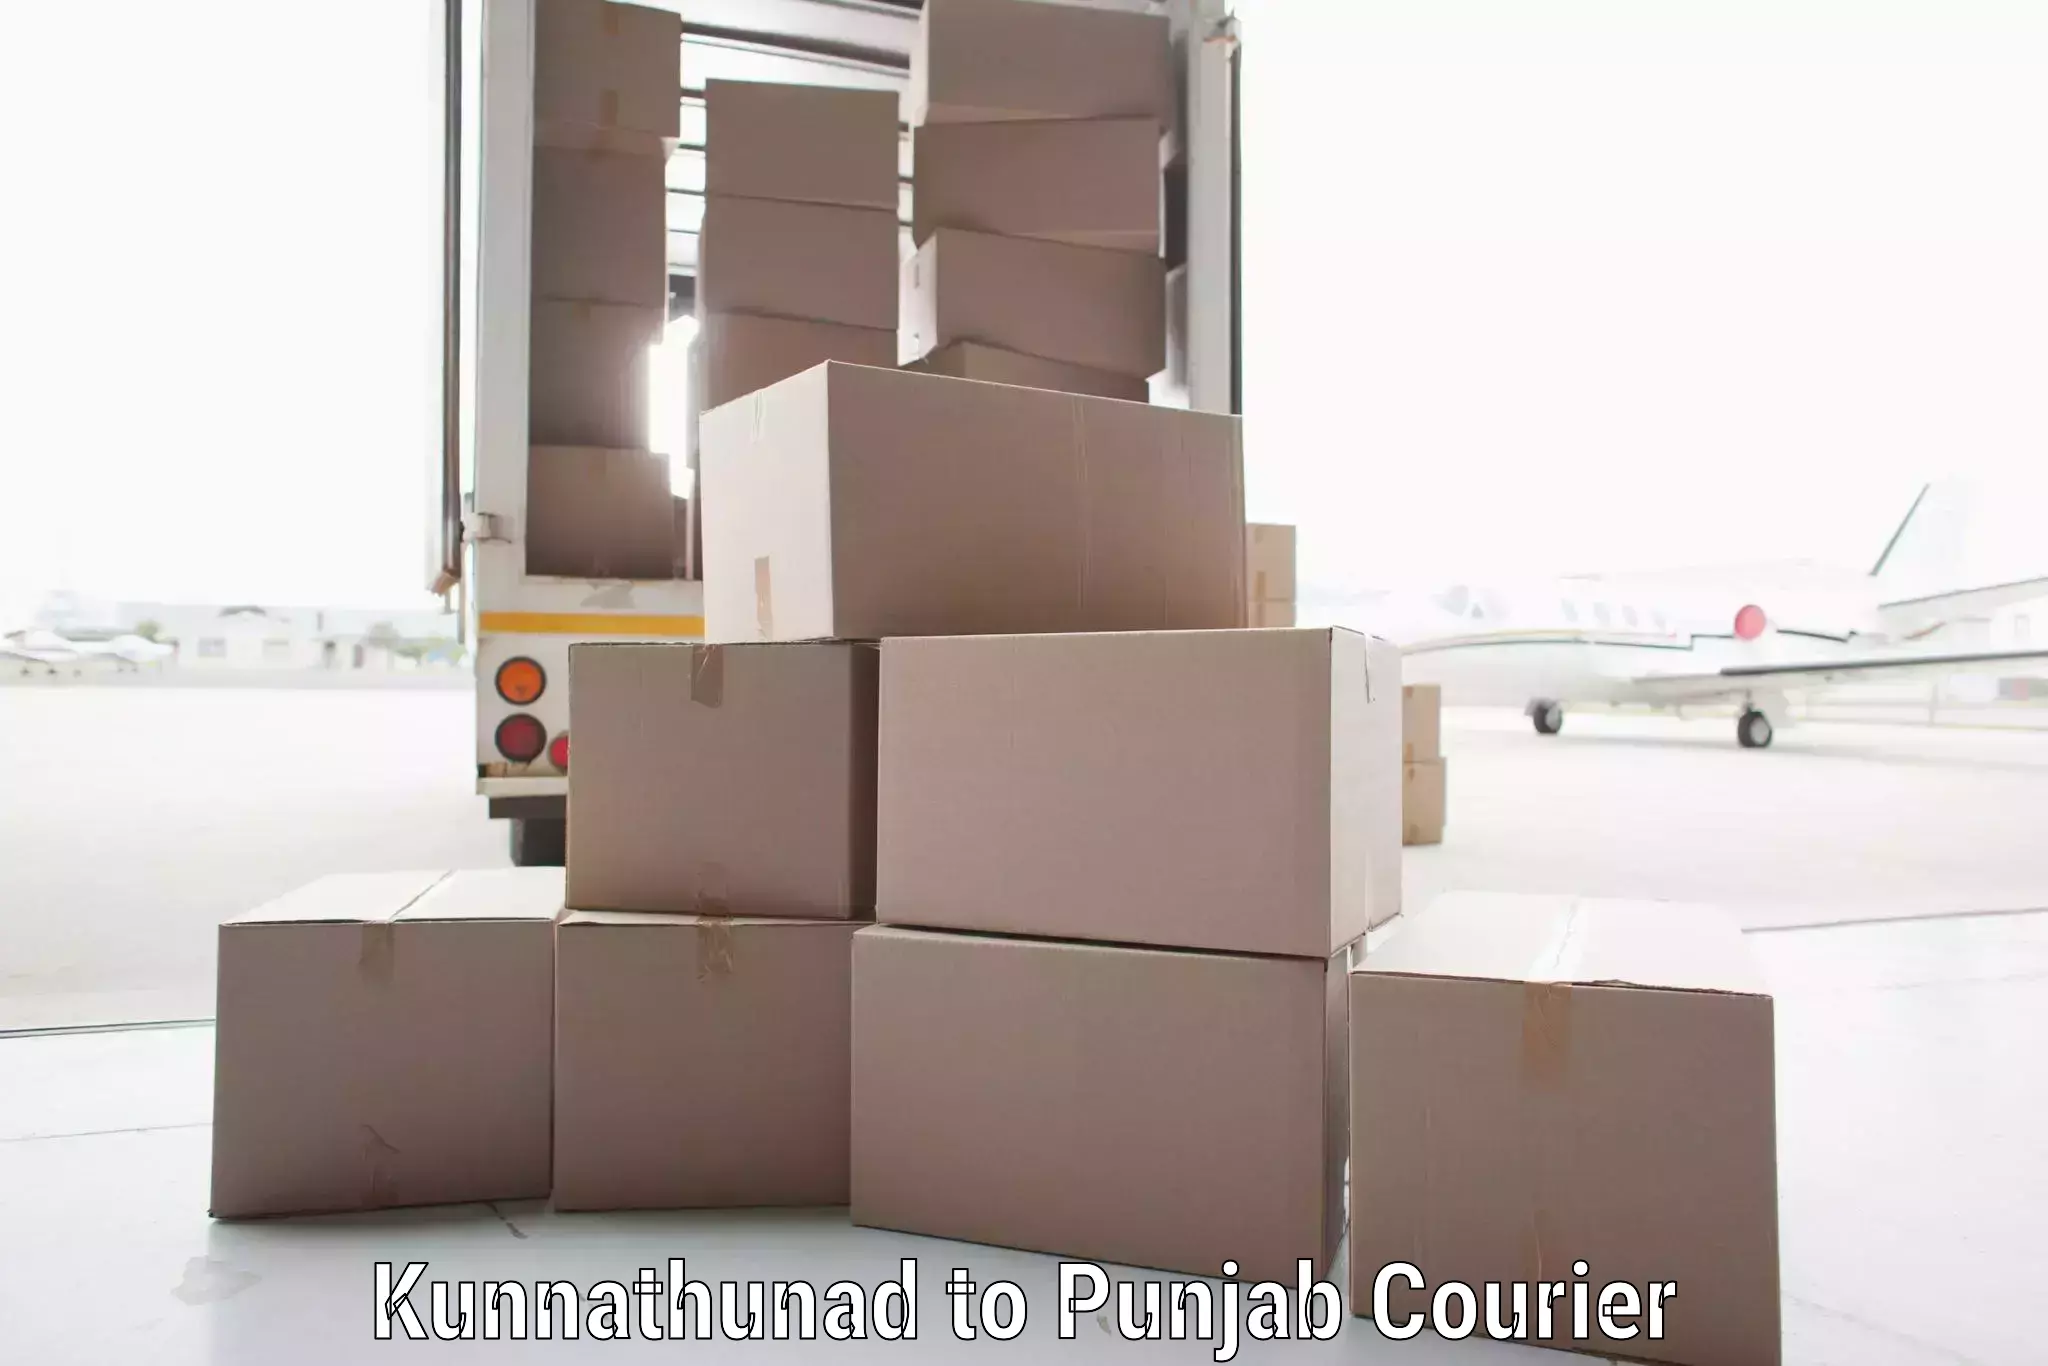 State-of-the-art courier technology Kunnathunad to Talwara